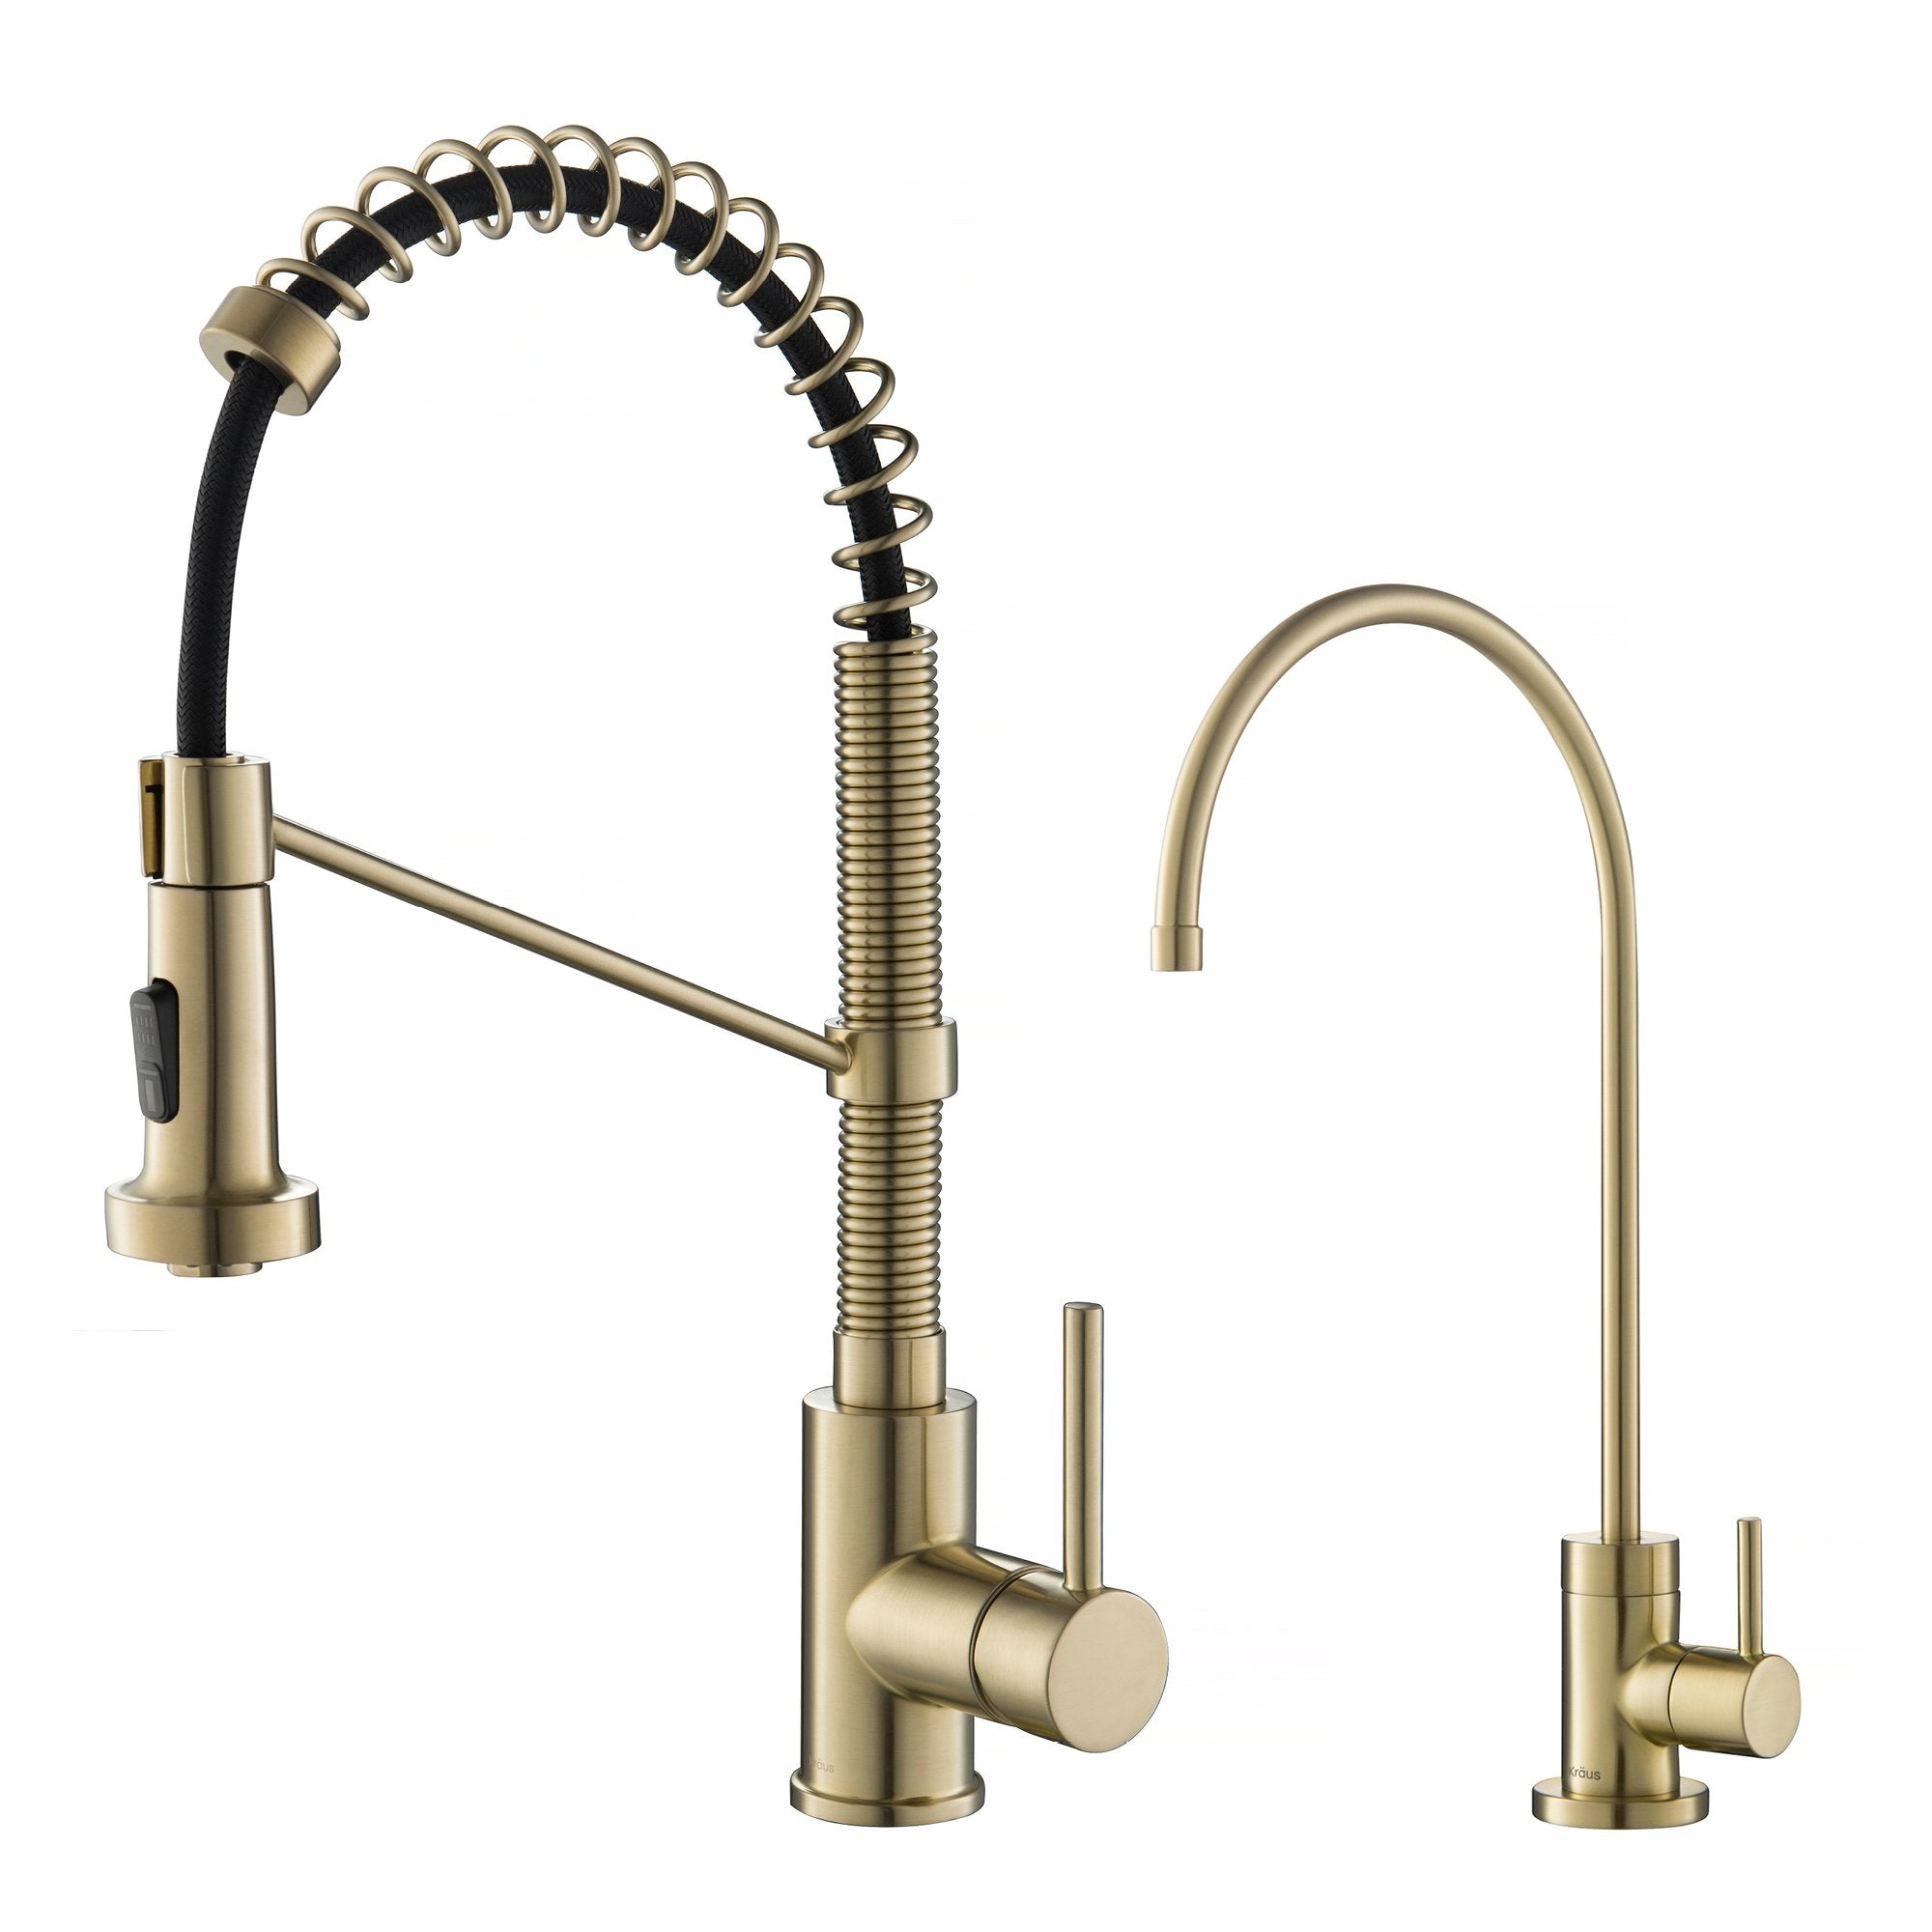 KRAUS Bolden Commercial Style Pull-Down Kitchen Faucet and Purita Water Filter Faucet Combo in Brushed Gold KPF-1610-FF-100BG | DirectSinks